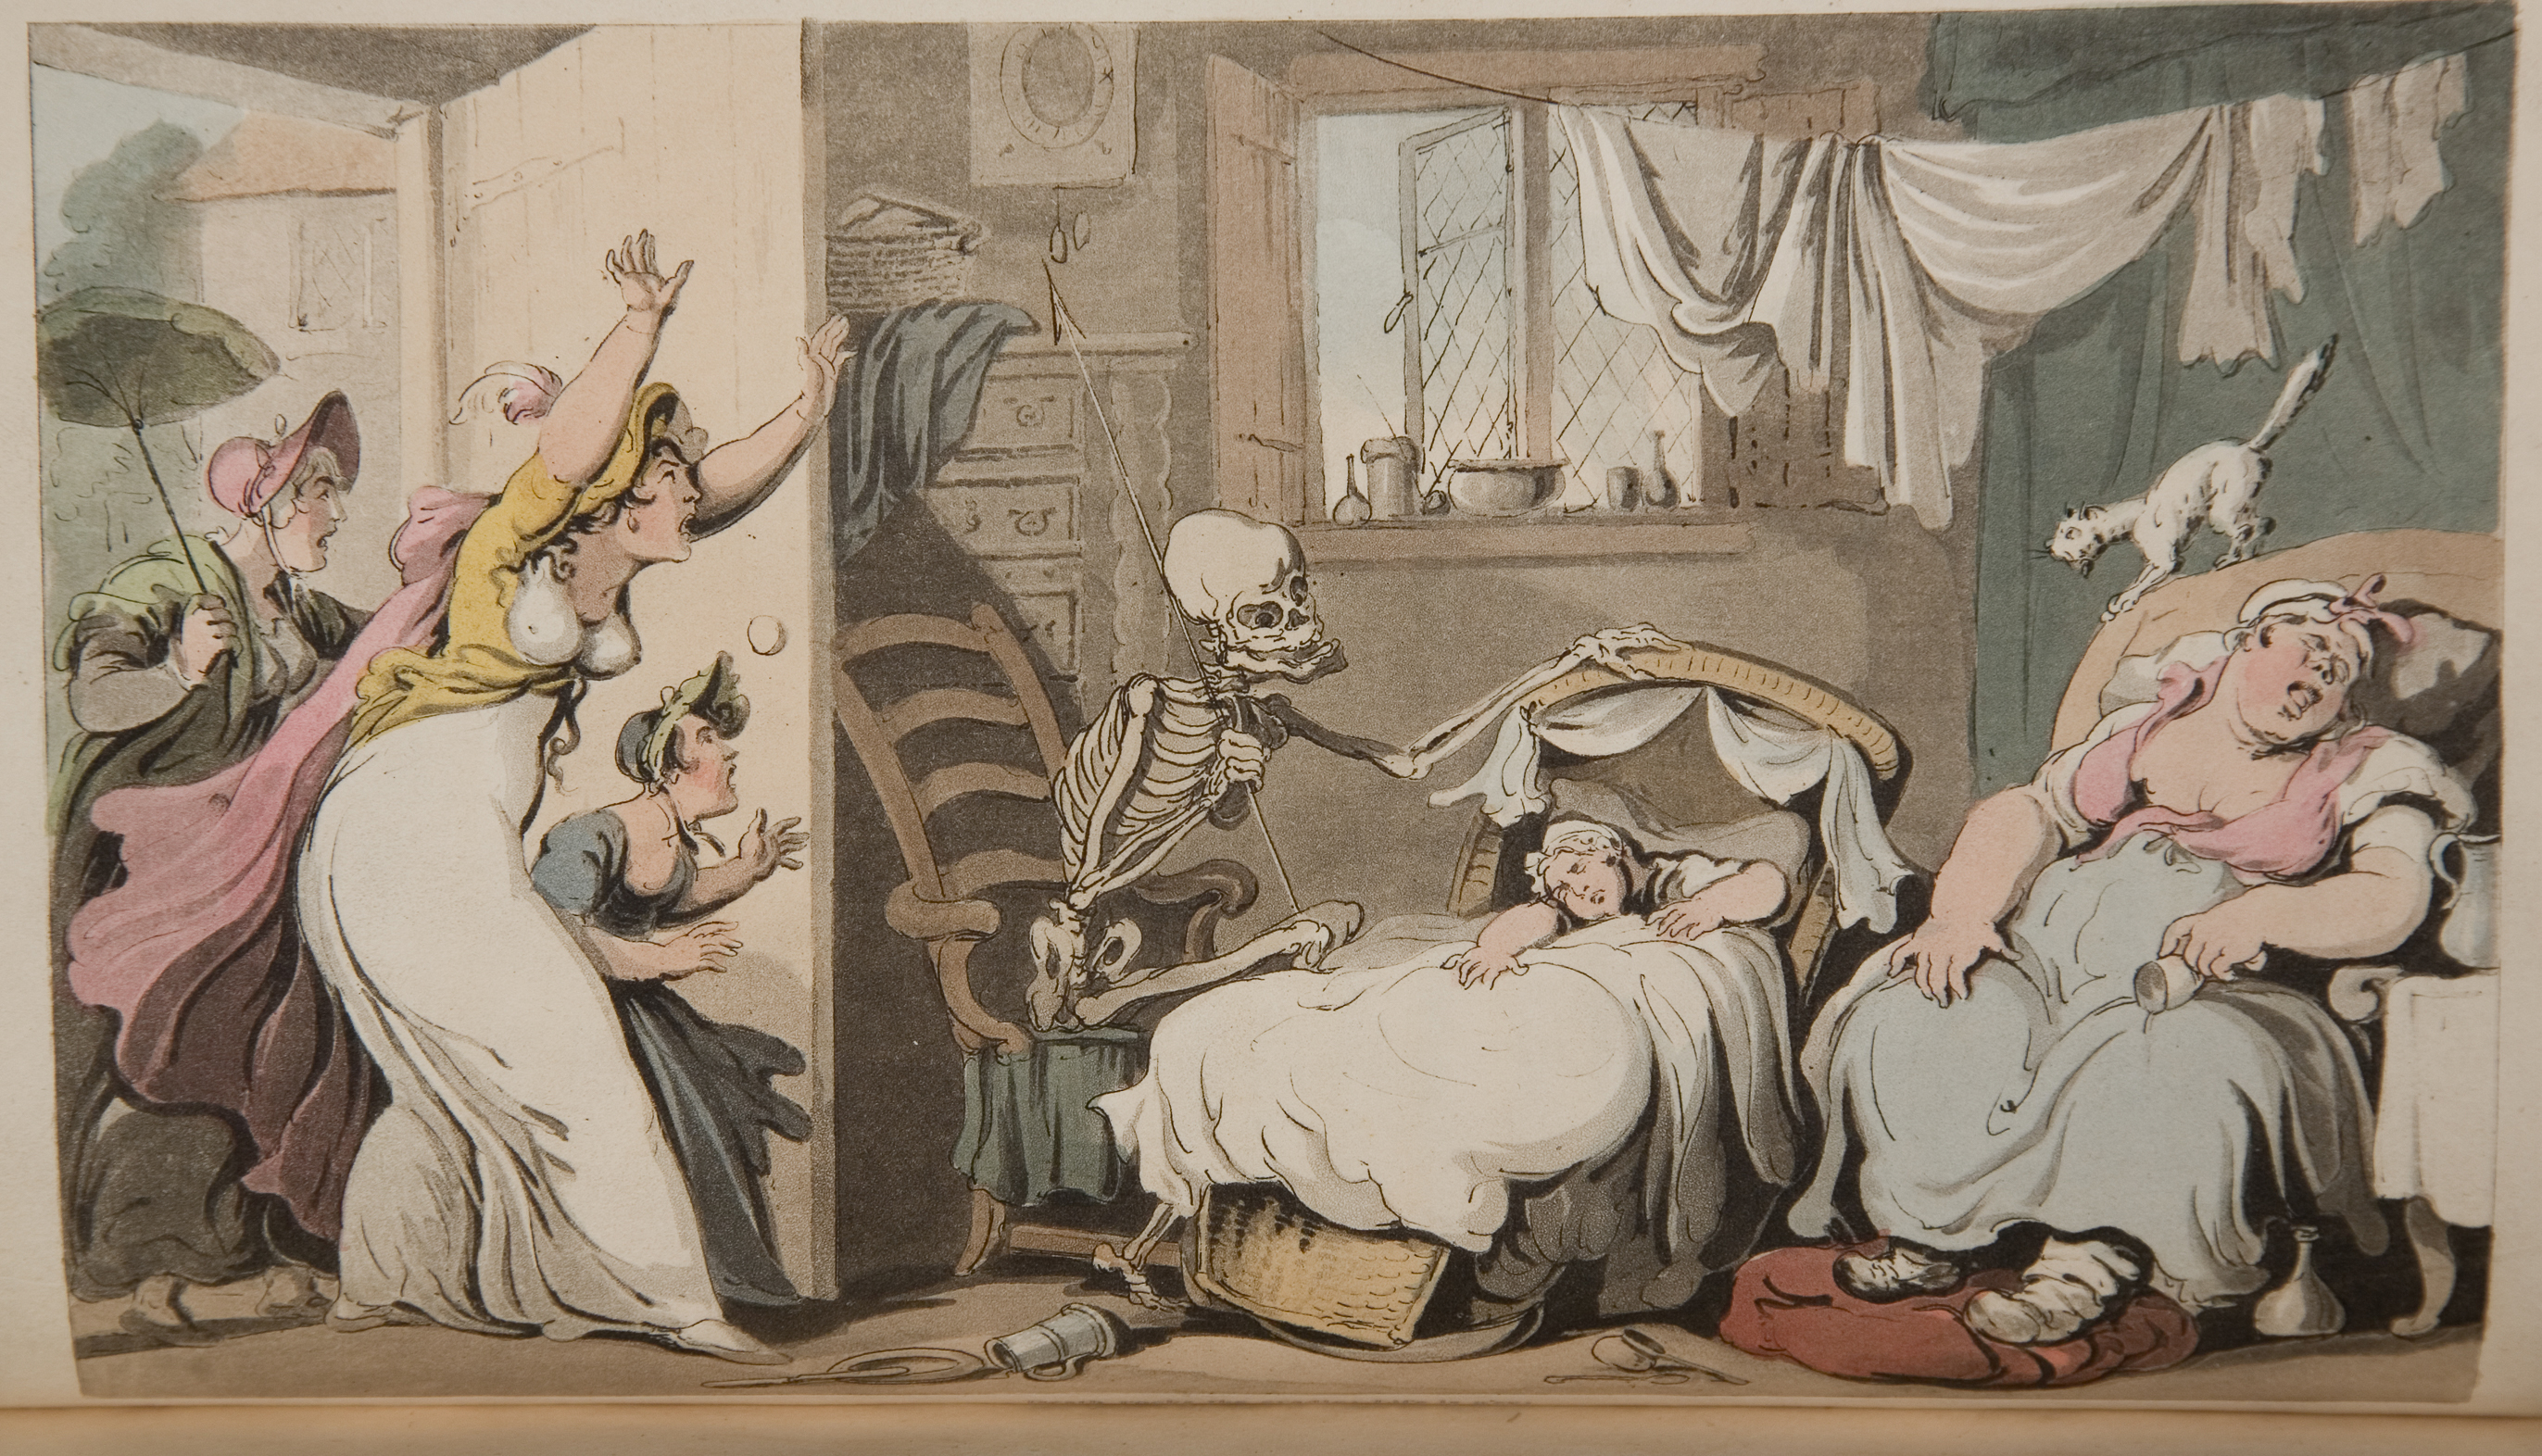 A hand-colored etching of a skeleton peering into a bassinet. A woman is slumped in her chair beside the bassinet. Three woman are entering on the left side of the picture. Their arms are raised in alarm. 